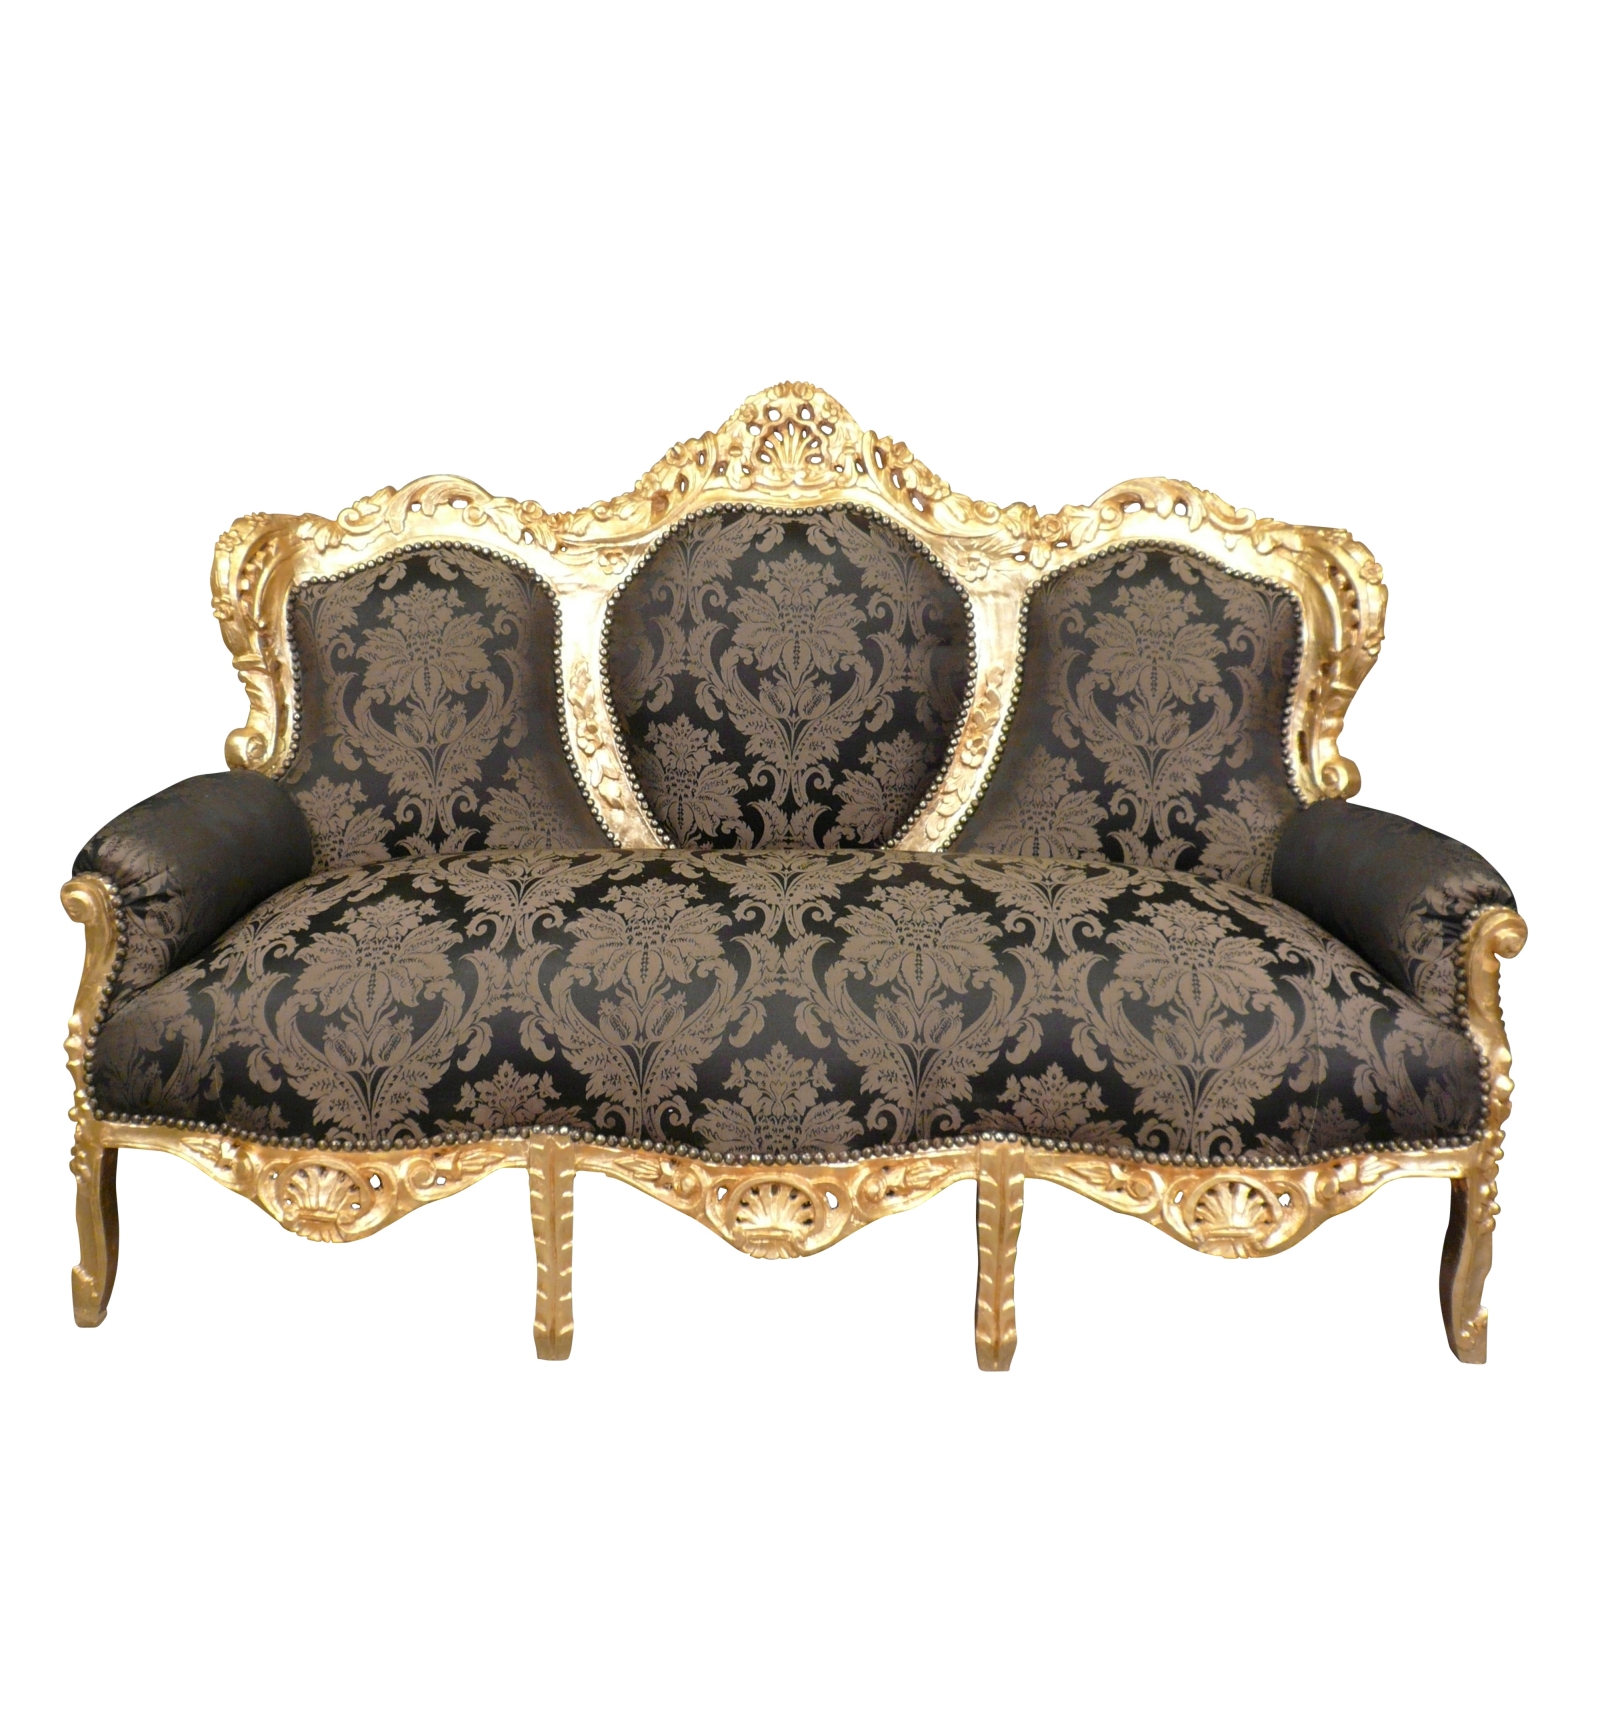 Baroque sofa in gilded wood and floral black fabric - Baroque furniture